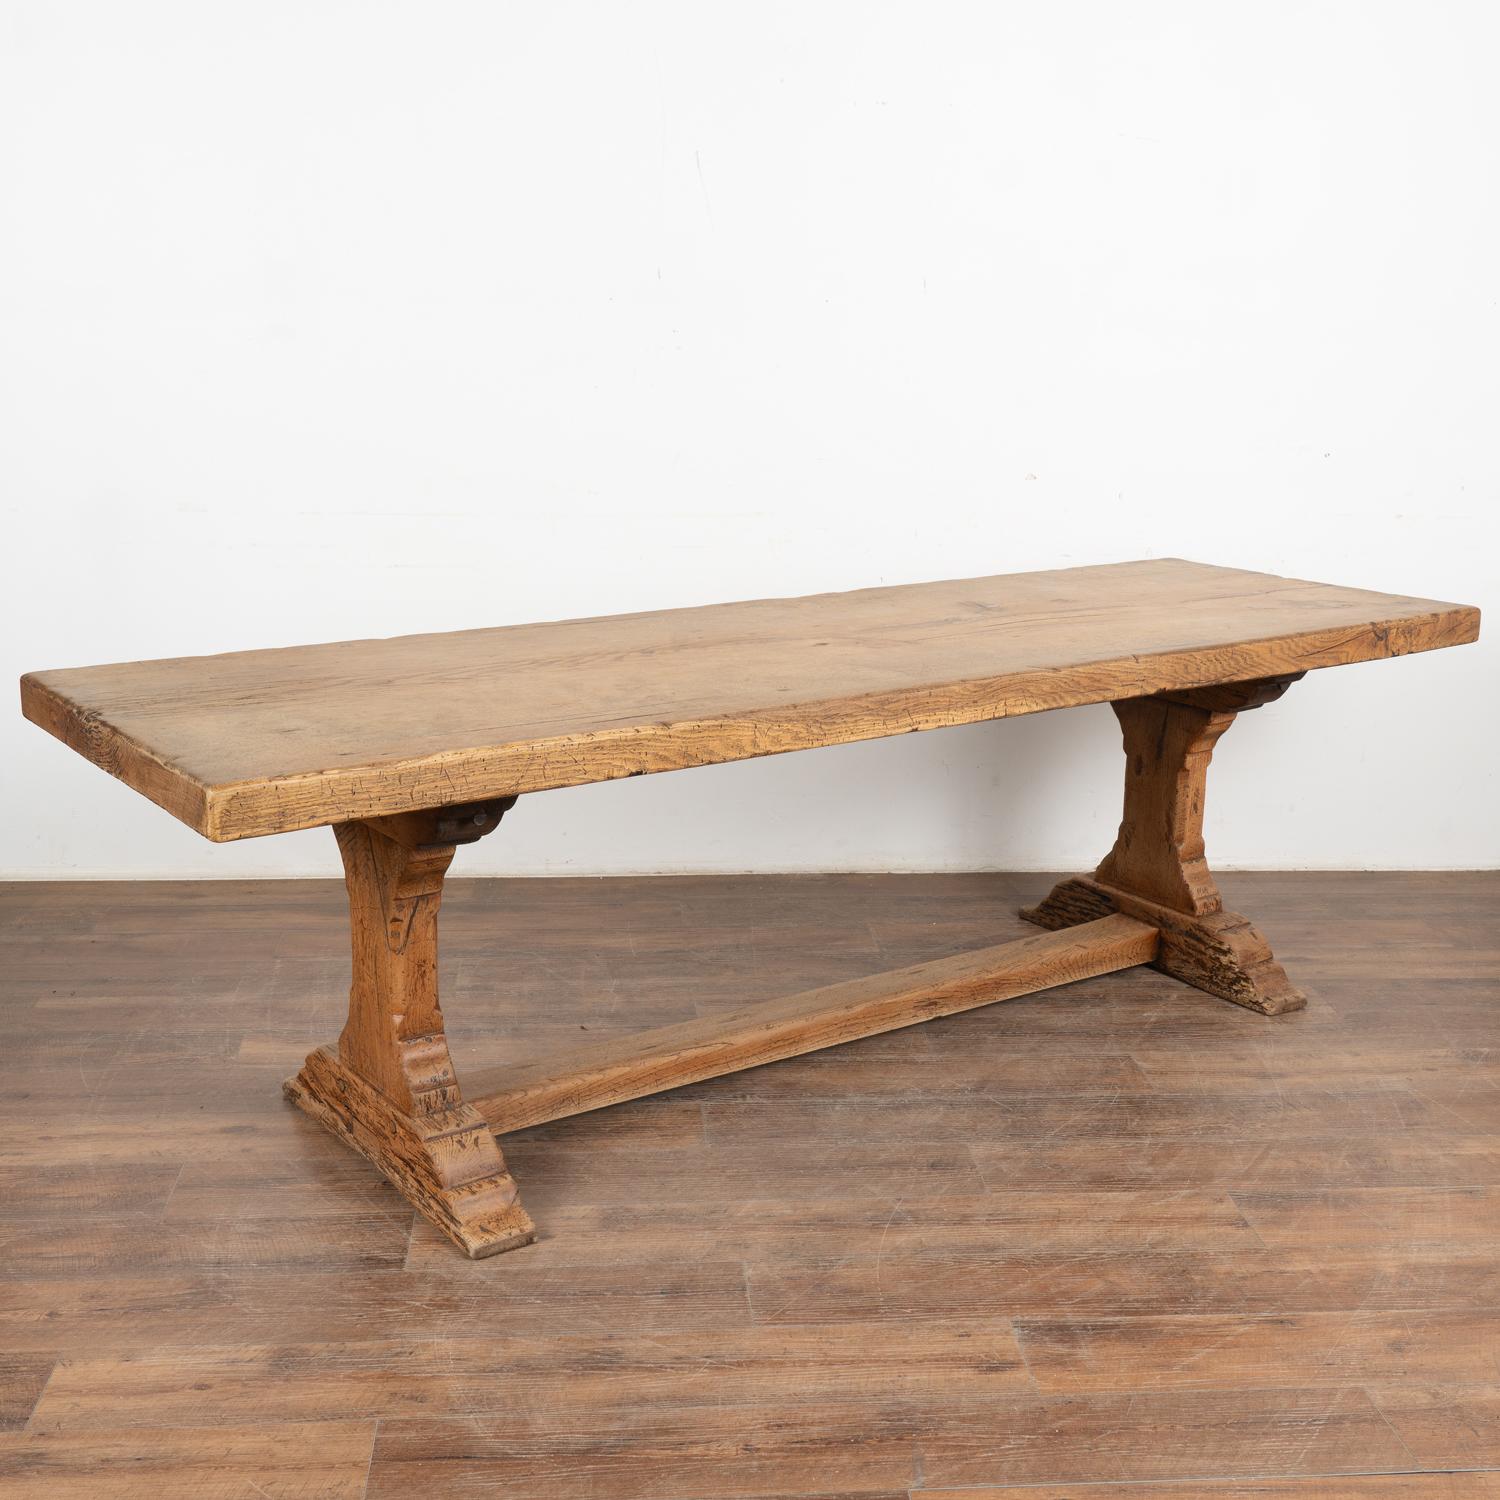 French Country Oak Dining Table, circa 1900-20 For Sale 8